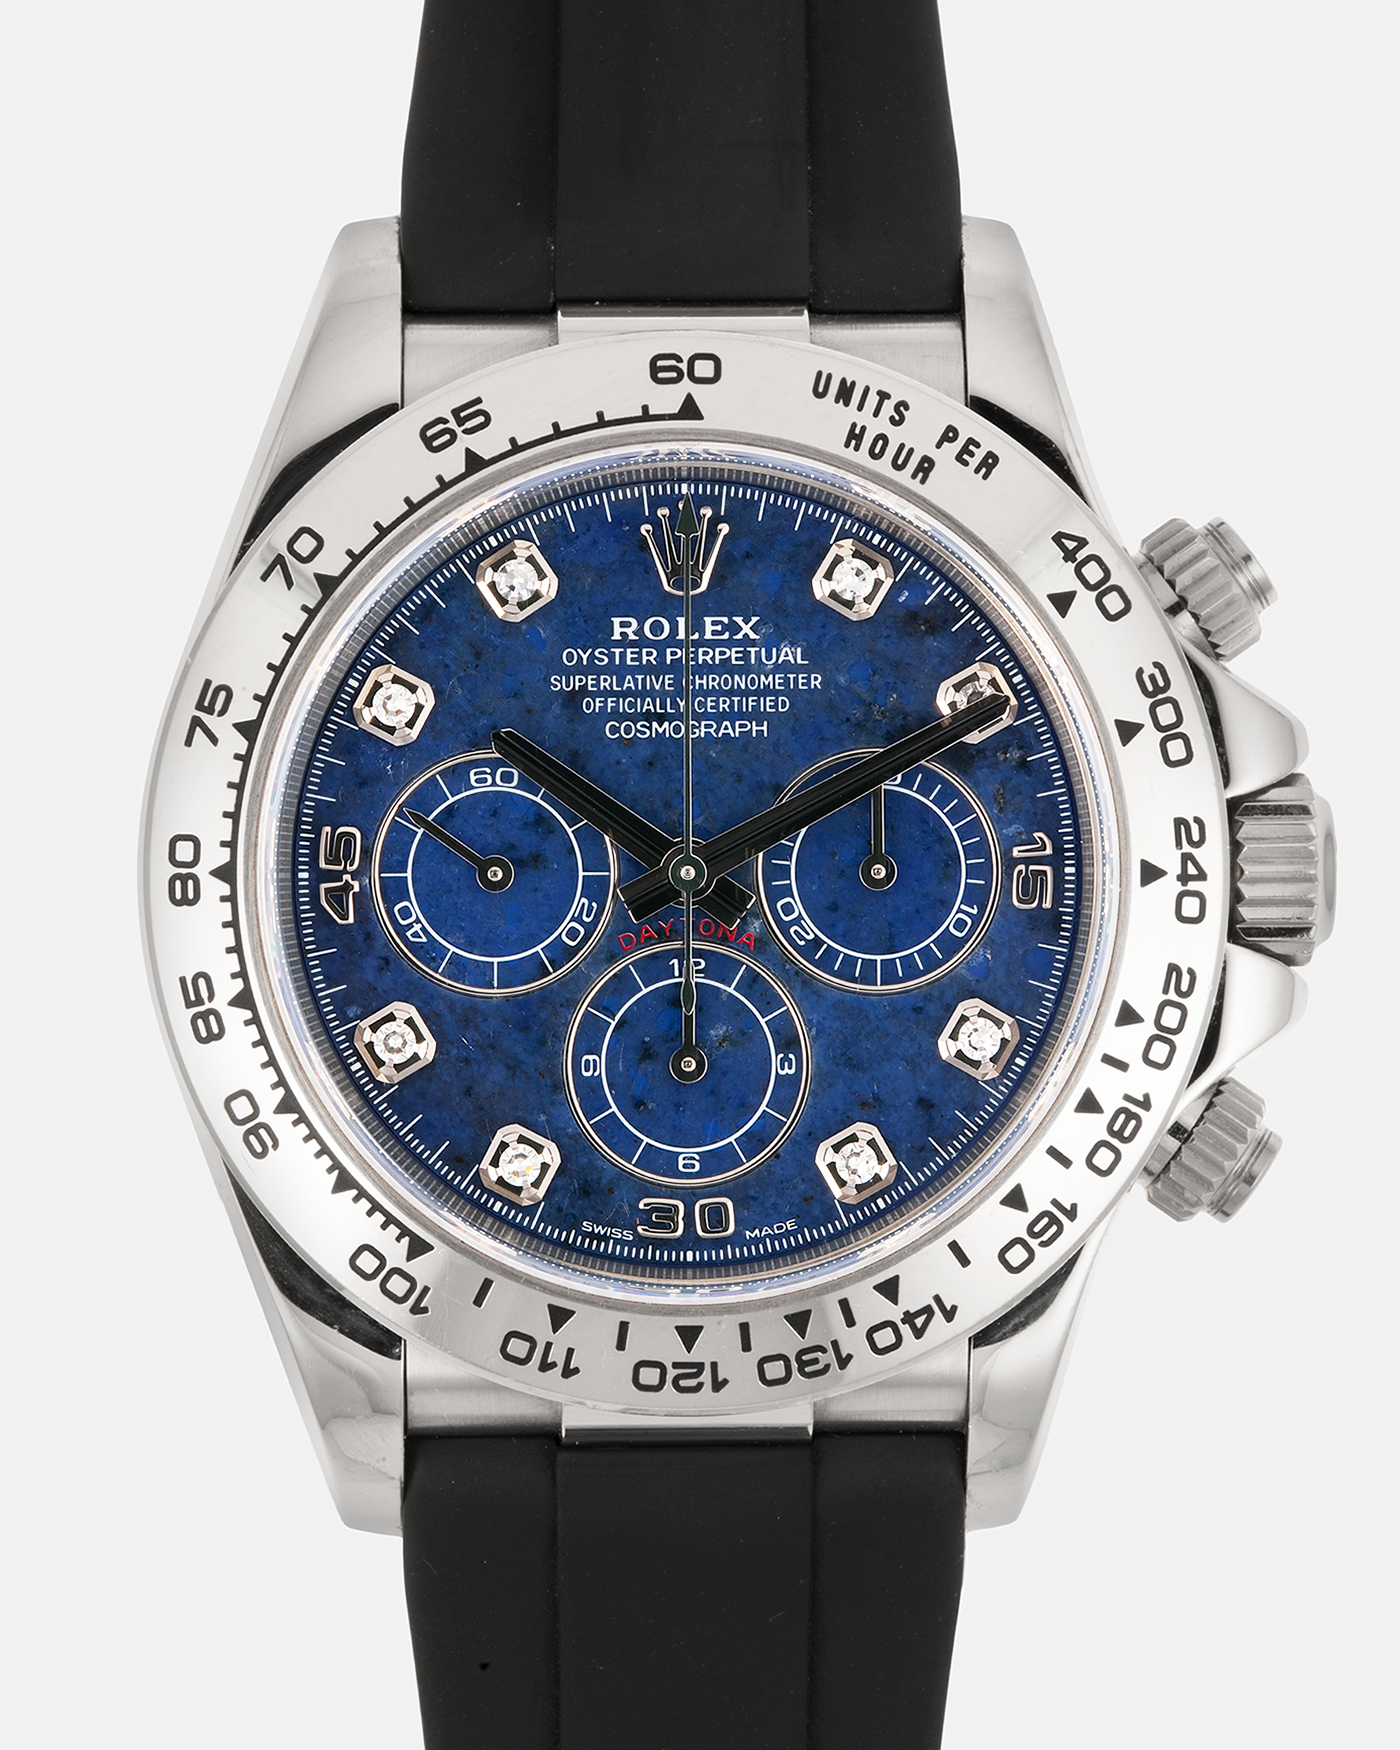 Brand: Rolex Year: 1999 Model: Cosmograph Daytona ‘Sodalite’ Reference: 16519 Serial Number: A112XXX Material: 18-carat White Gold Case, Sodalite Stone Dial, Diamond Hour Markers Movement: Rolex Cal. 4030 (Based on the Zenith El Primero Cal. 400), Self-Winding Case Diameter: 40mm Lug Width: 20mm Strap: Black Caoutchouc Rubber Strap with Signed 18-carat White Gold Deployant Clasp, with additional Swiss ABRT Ultramarine Alligator Leather Strap